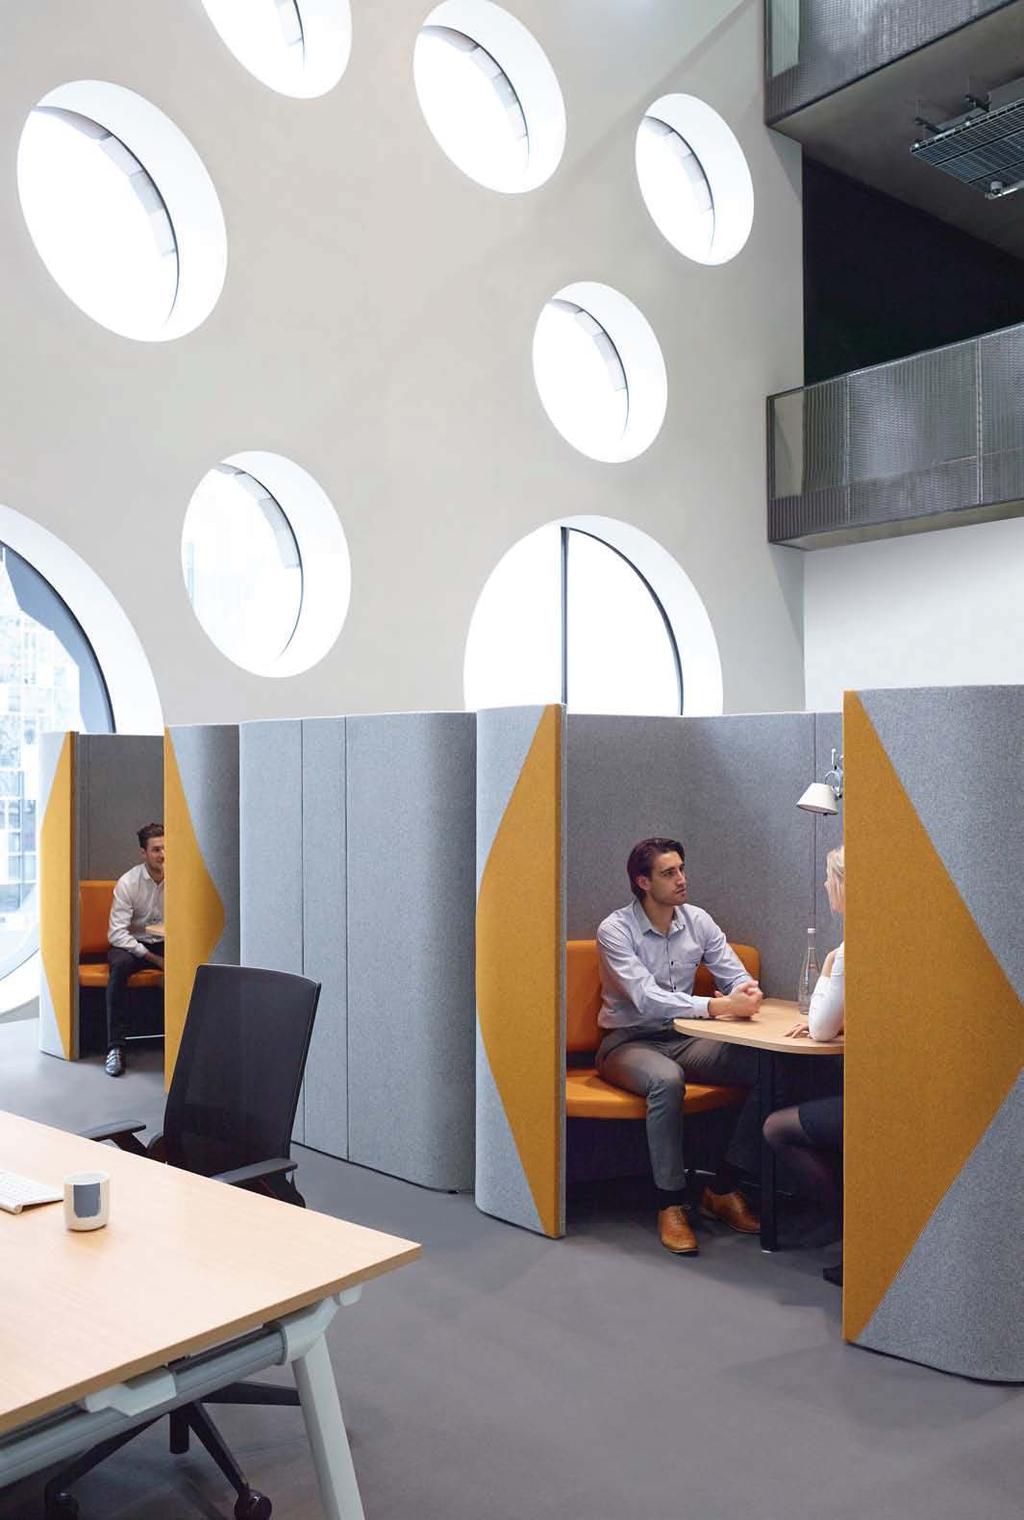 Visual and acoustic privacy for concentration